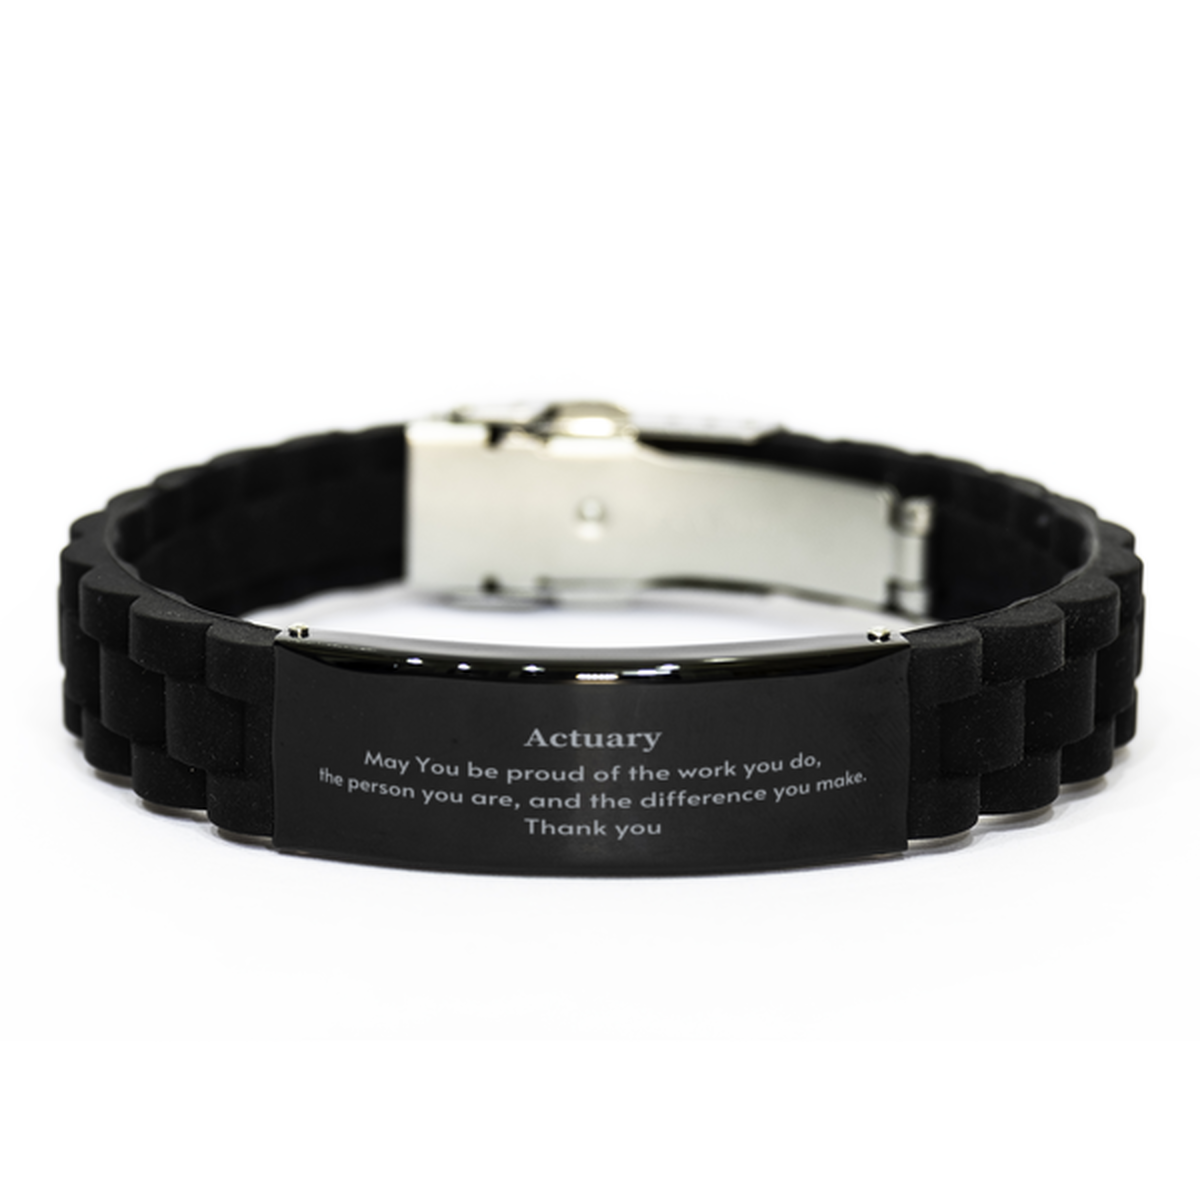 Heartwarming Black Glidelock Clasp Bracelet Retirement Coworkers Gifts for Actuary, Actuary May You be proud of the work you do, the person you are Gifts for Boss Men Women Friends